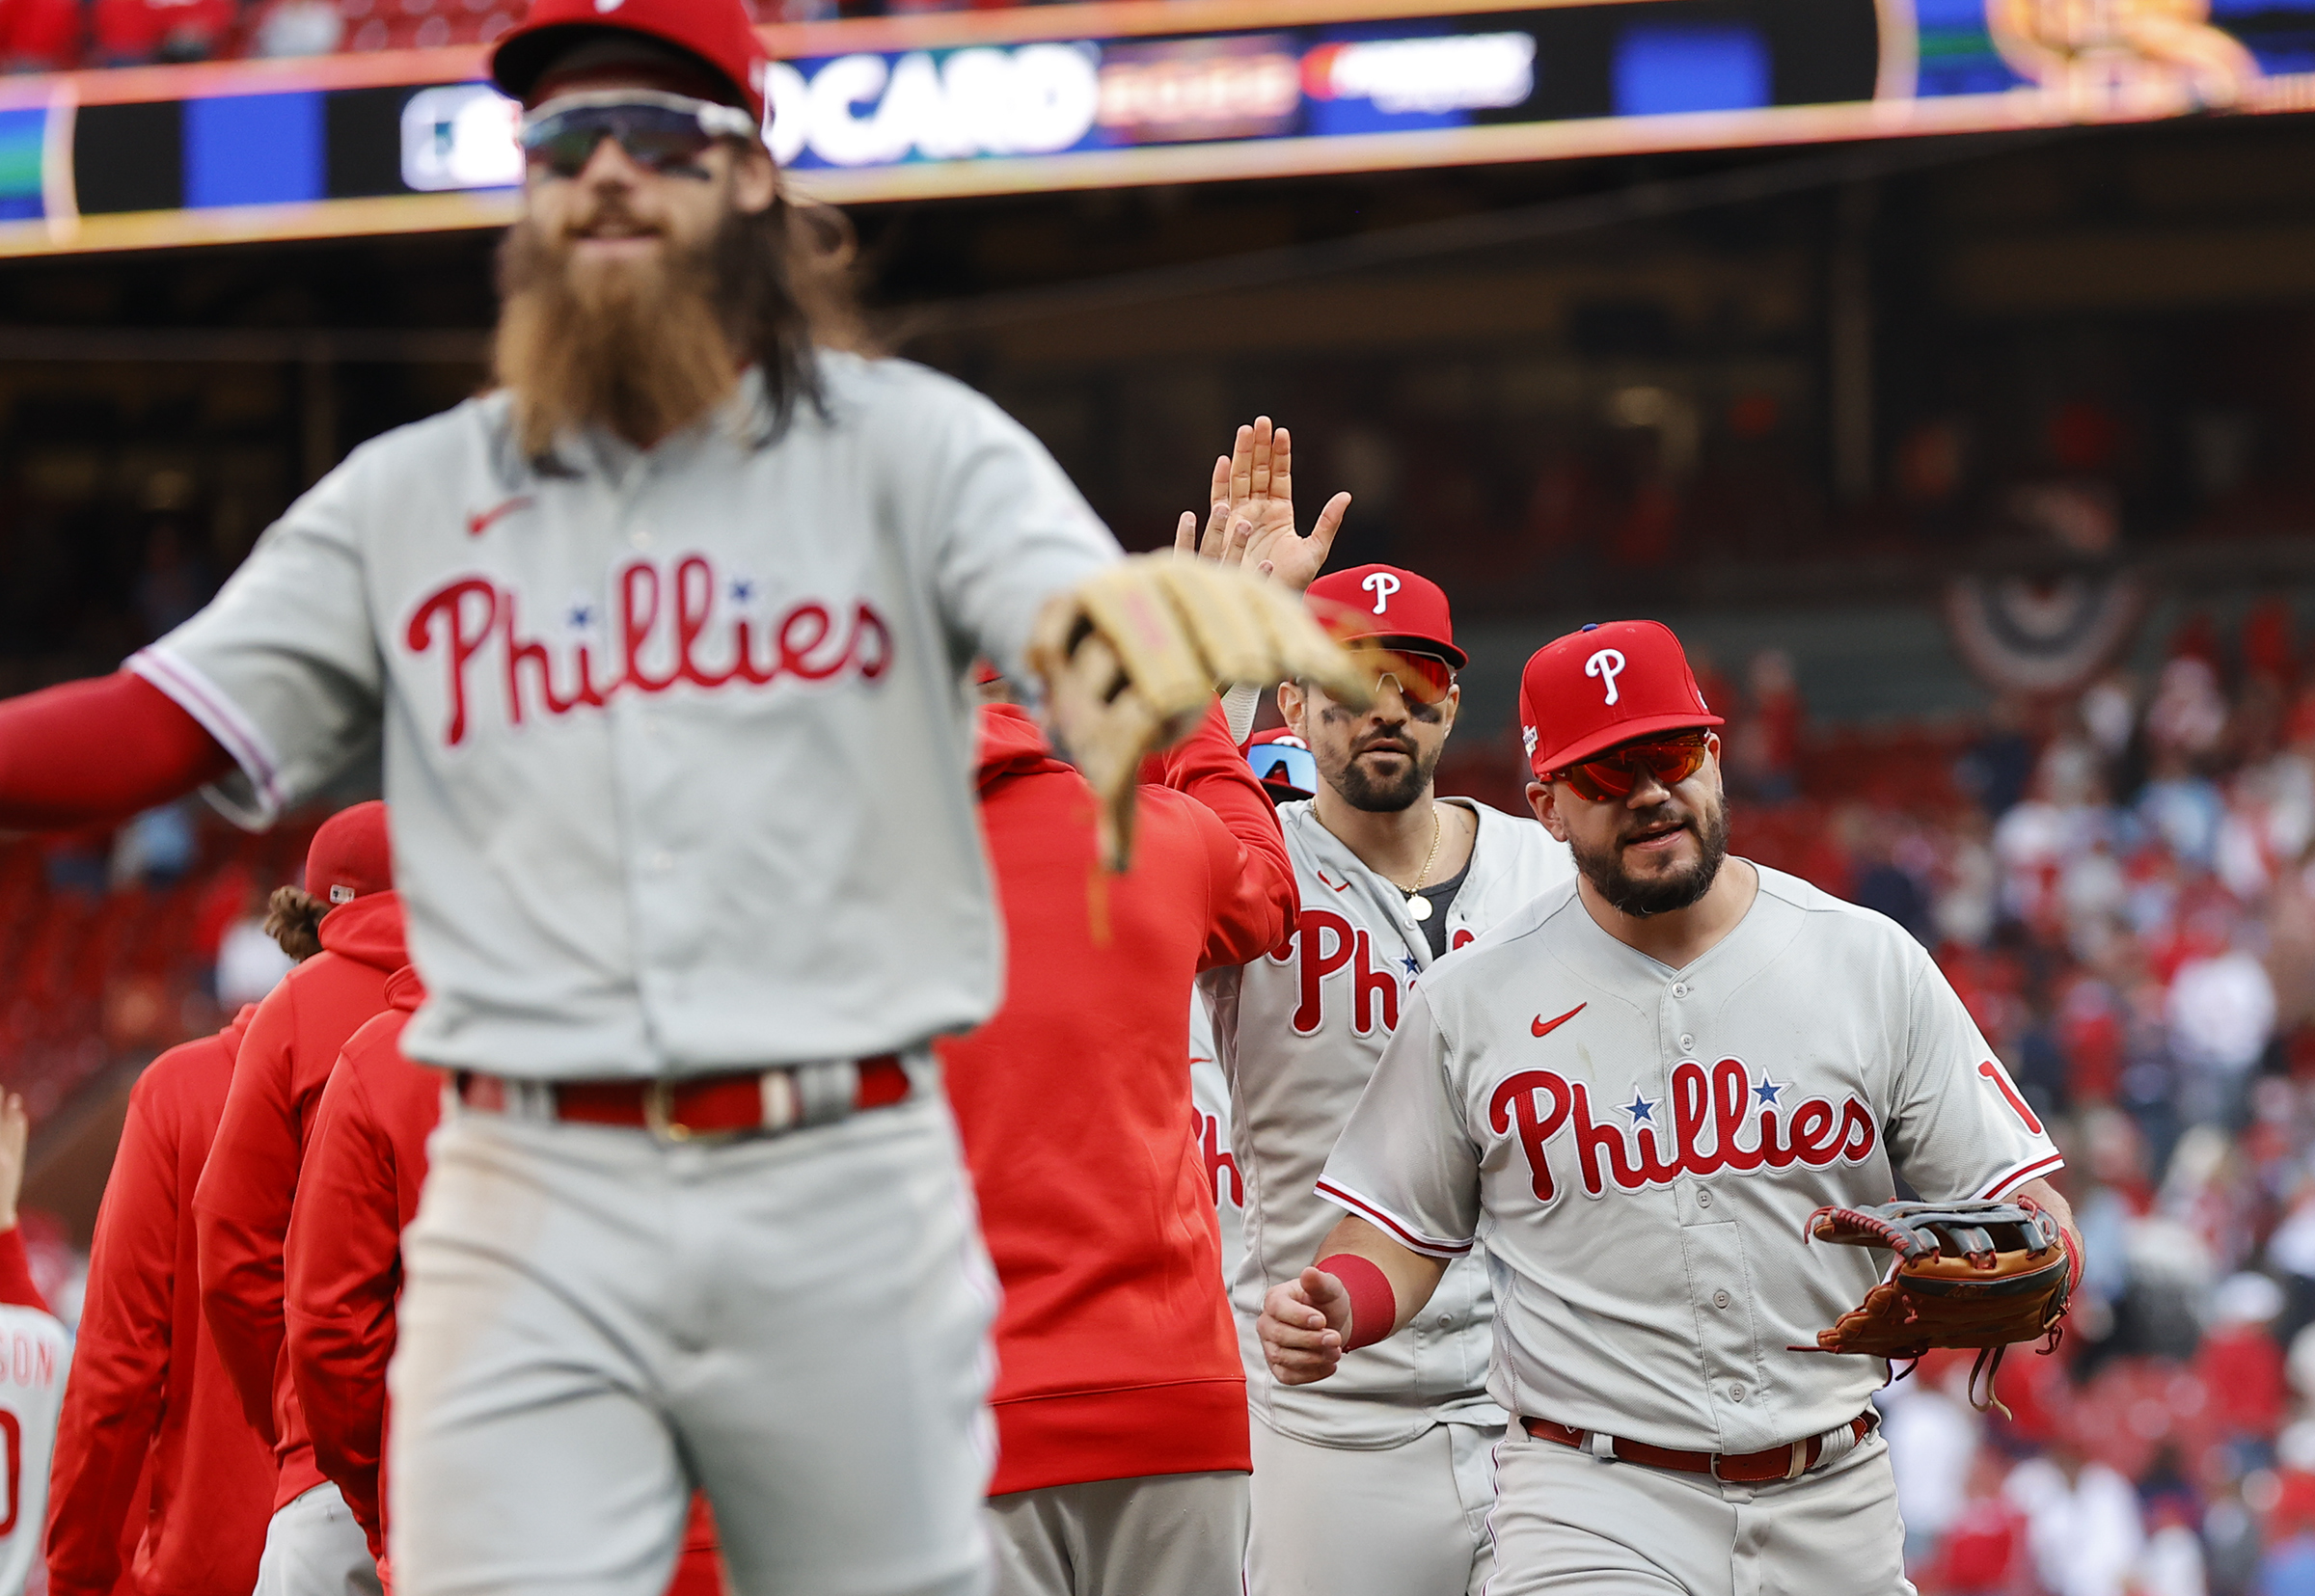 Philly businesses are booming as Phillies make playoff run